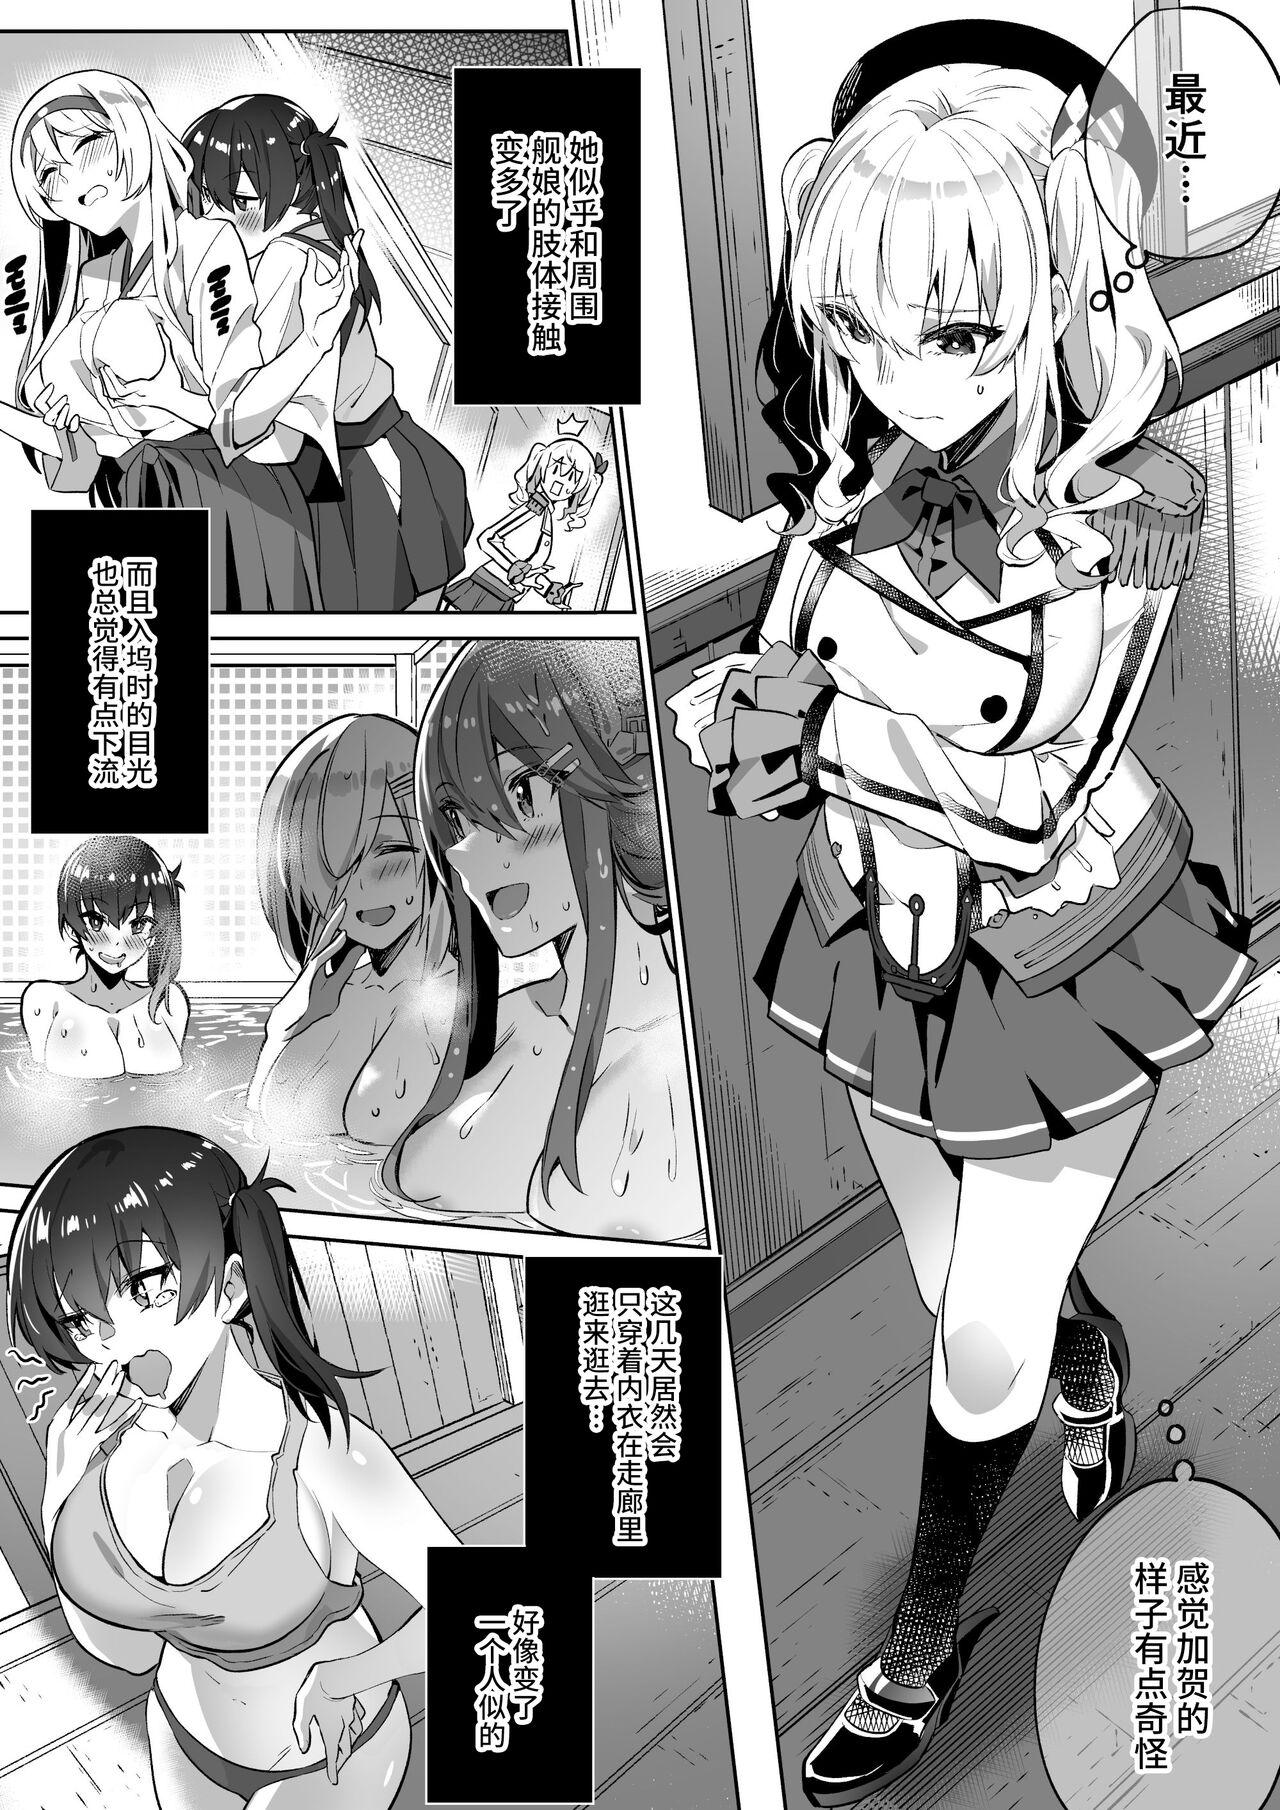 Male 艦これ 加賀&鹿島憑依 - Kantai collection High Heels - Page 1